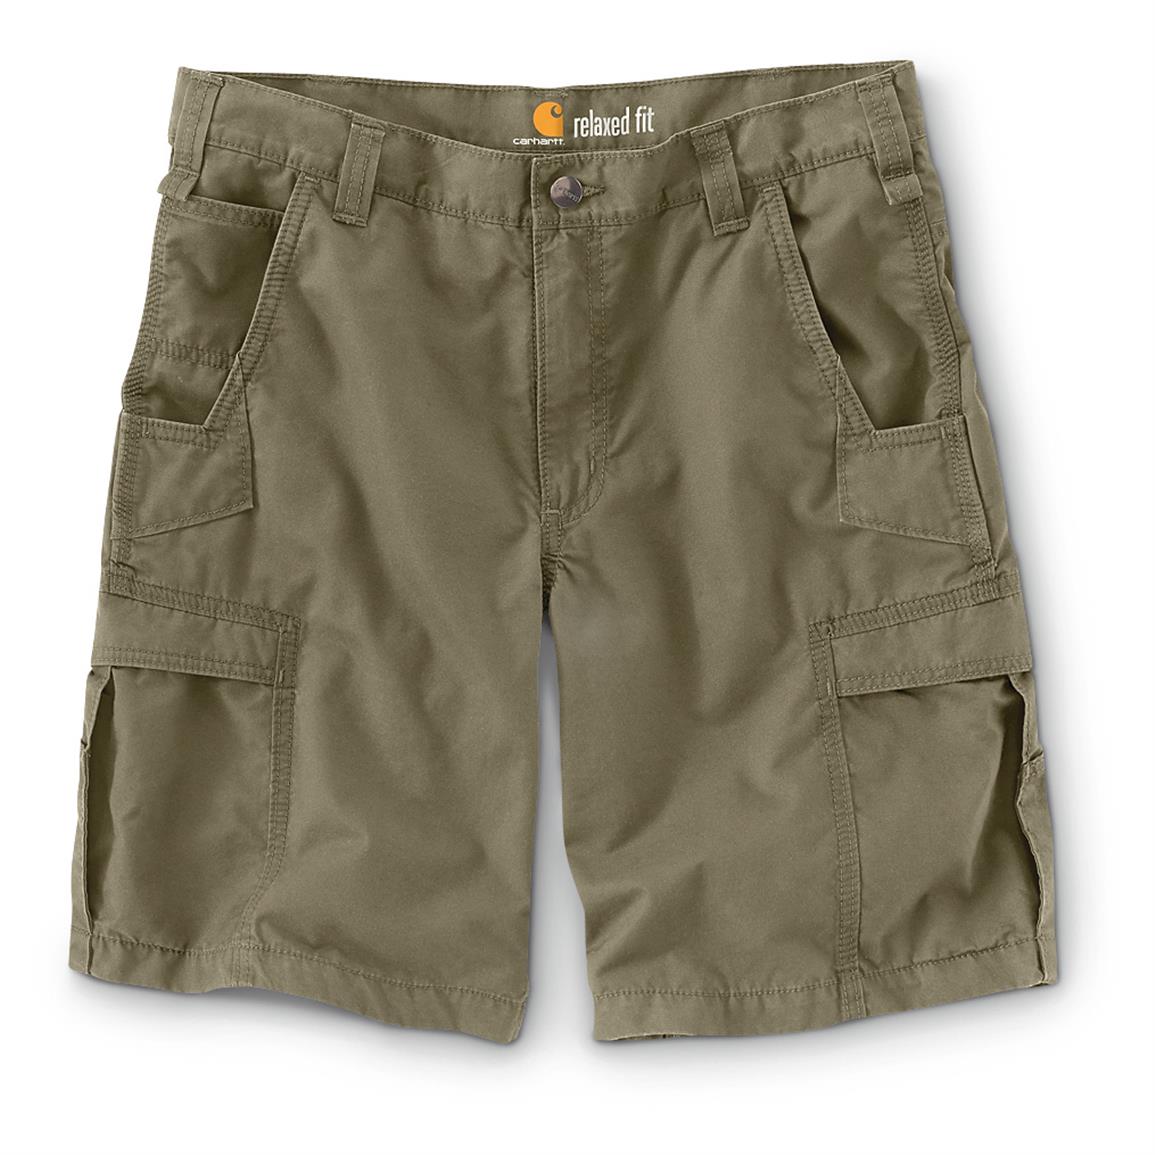 Carhartt Men's Mosby Cargo Shorts - 623536, Shorts at Sportsman's Guide